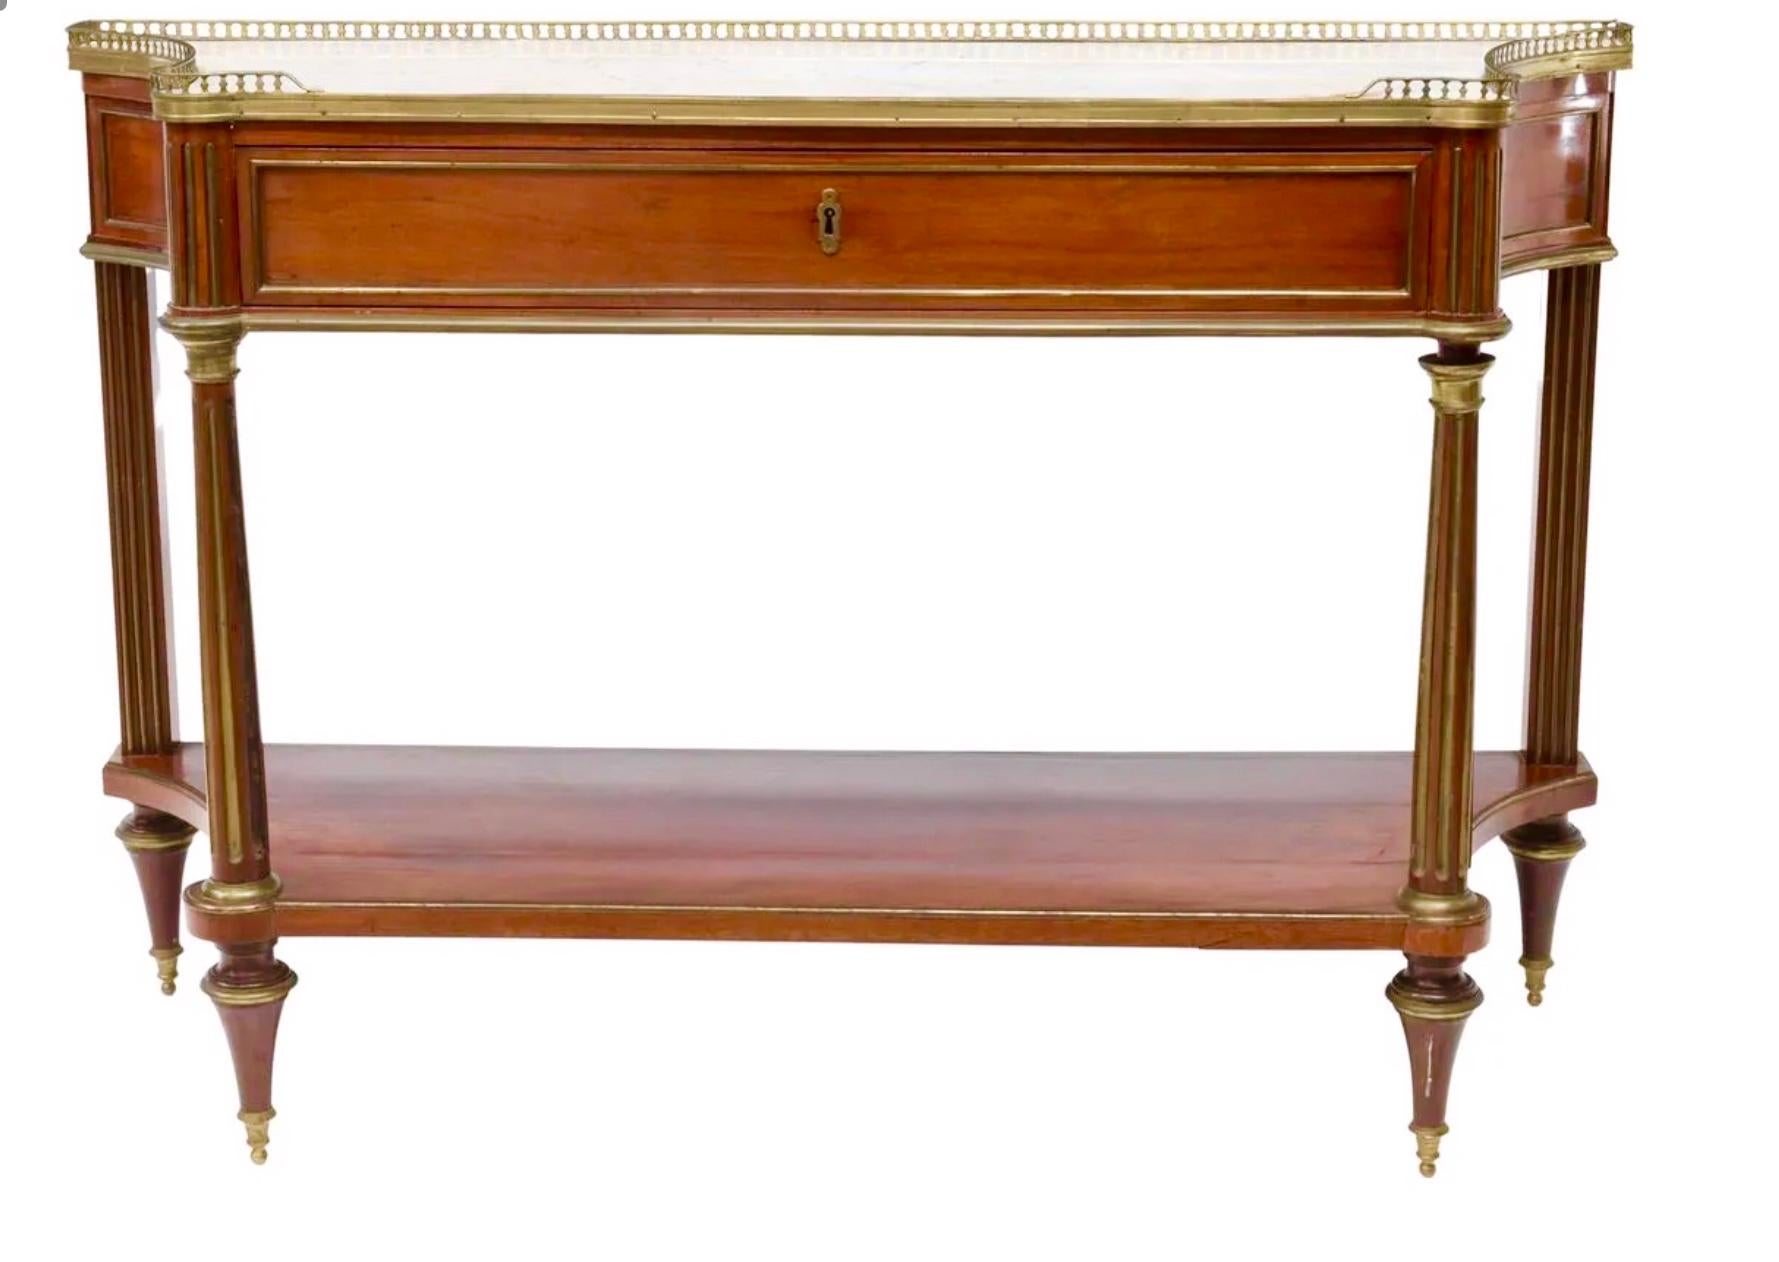 With fluted legs and brass top gallery. Good rich color and patina. Lower shelf with age crack ( stabilized ). Scalloped sides. Toupie feet and with key .

Sturdy. Tarnish to brass fittings. Separation ( crack ) to lower shelf. Dents and dings to